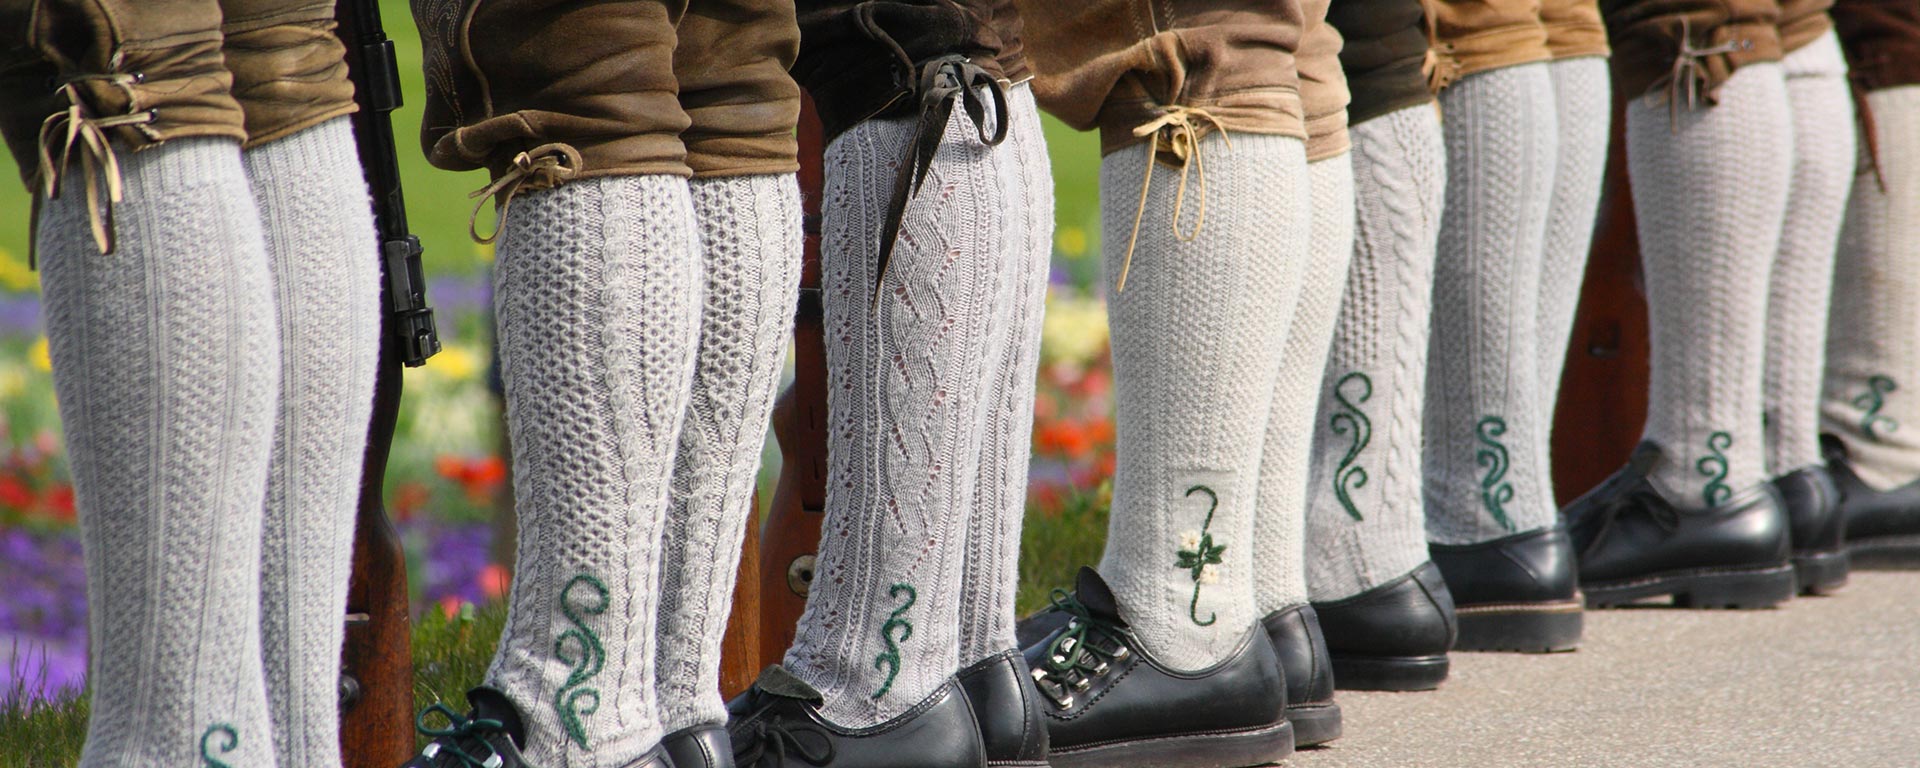 close up picture of some men's traditional shoes and socks during a folk festival in San Vigilio di Marebbe